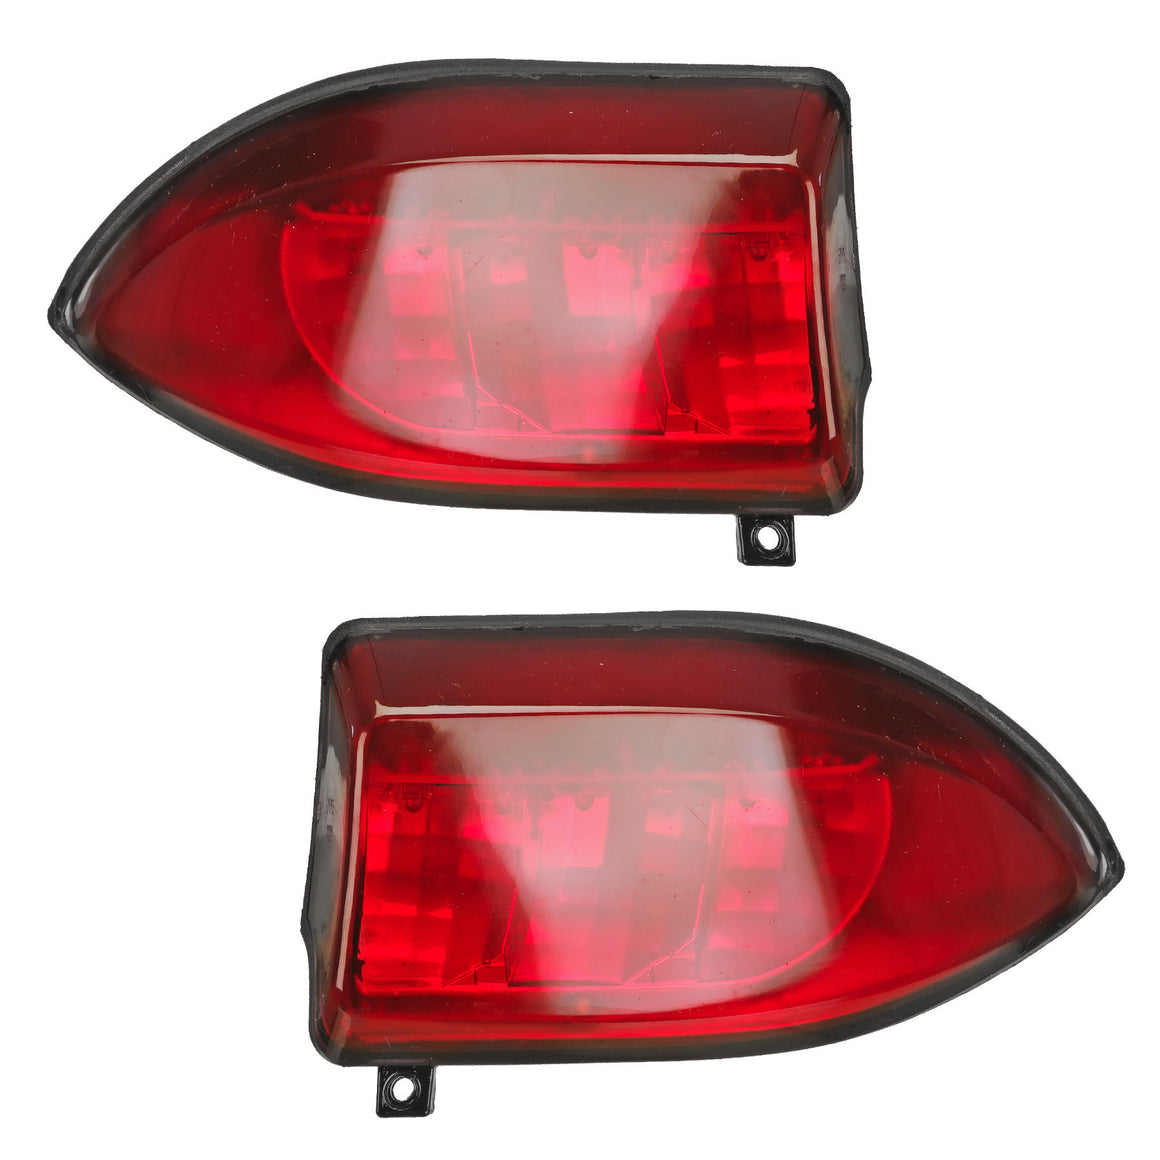 Route 66 LED Tail Lights for Club Car Precedent (2004-Up)